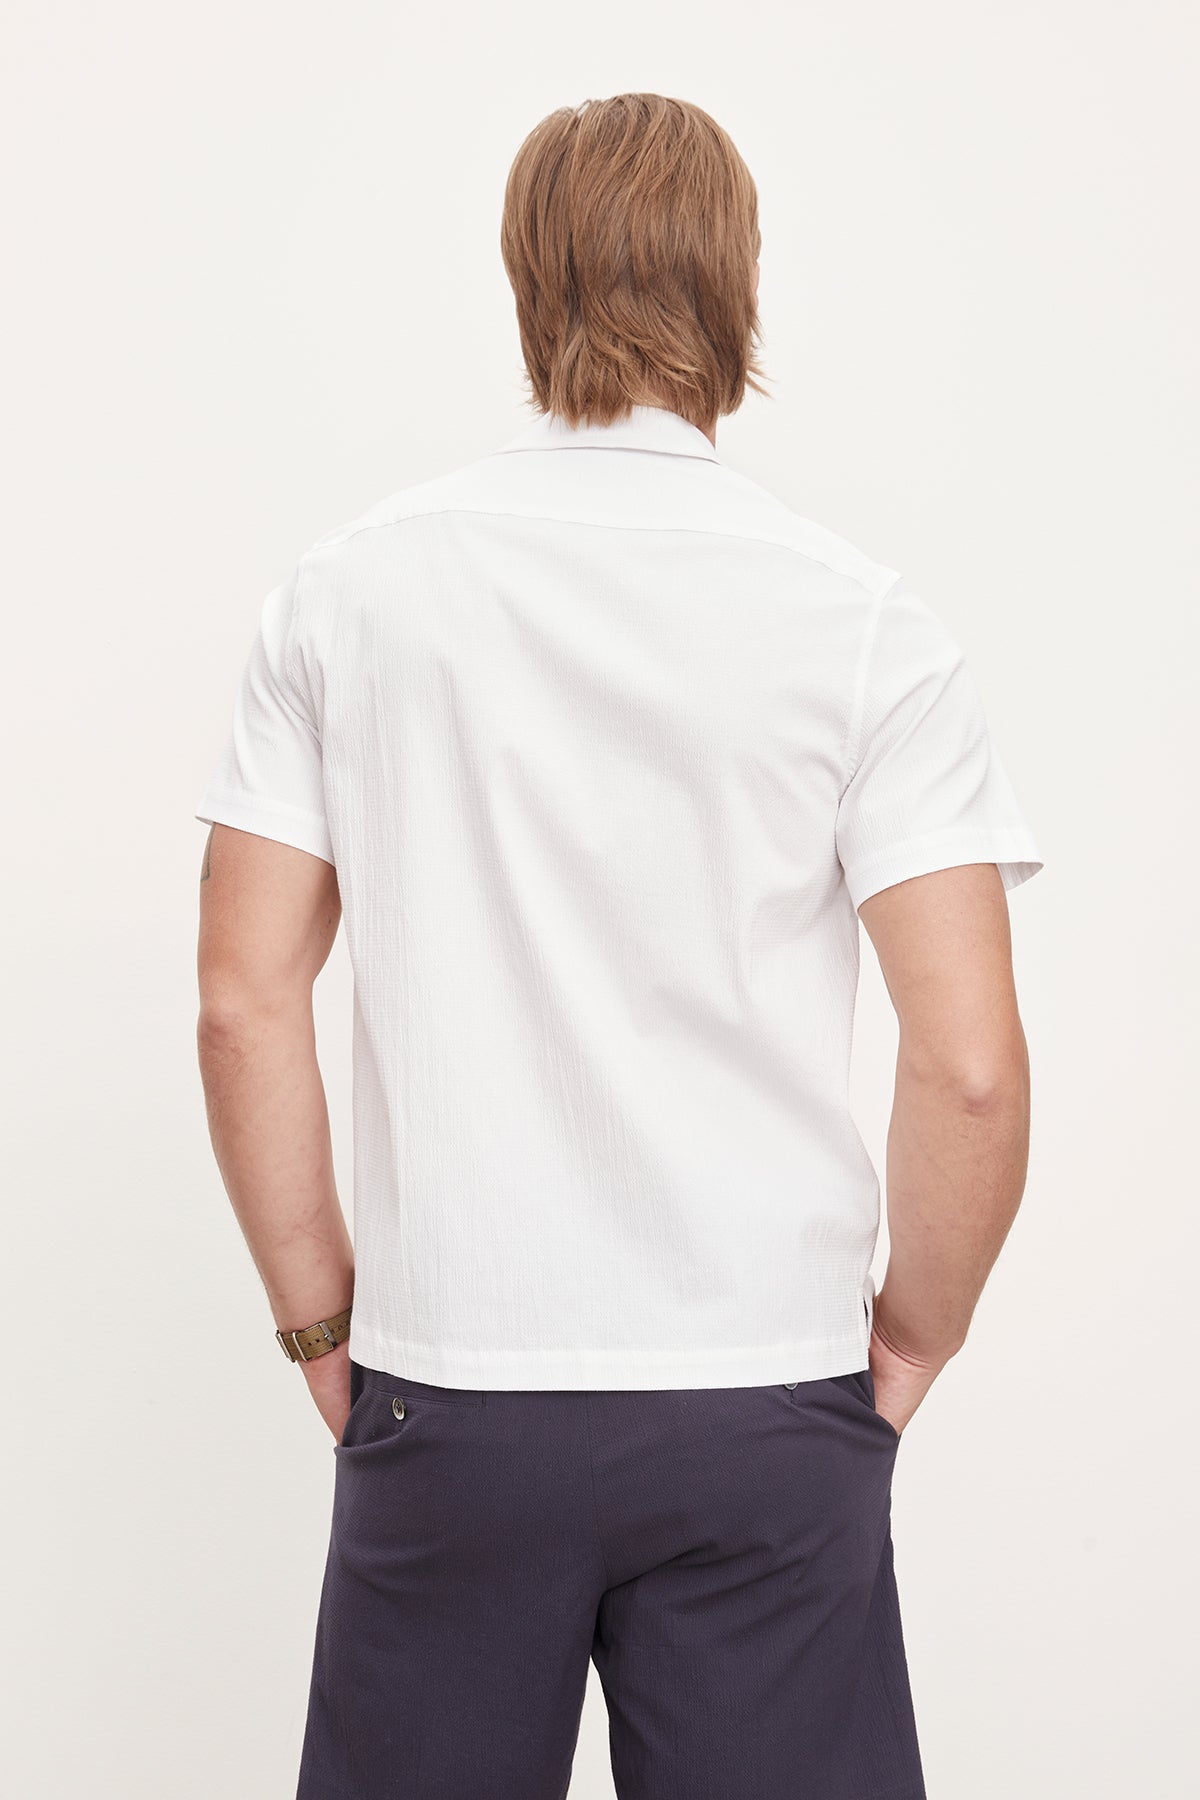 Man standing with his back to the camera, wearing a white seersucker cotton FRANK BUTTON-UP SHIRT by Velvet by Graham & Spencer and dark trousers, against a plain light background.-36918598369473